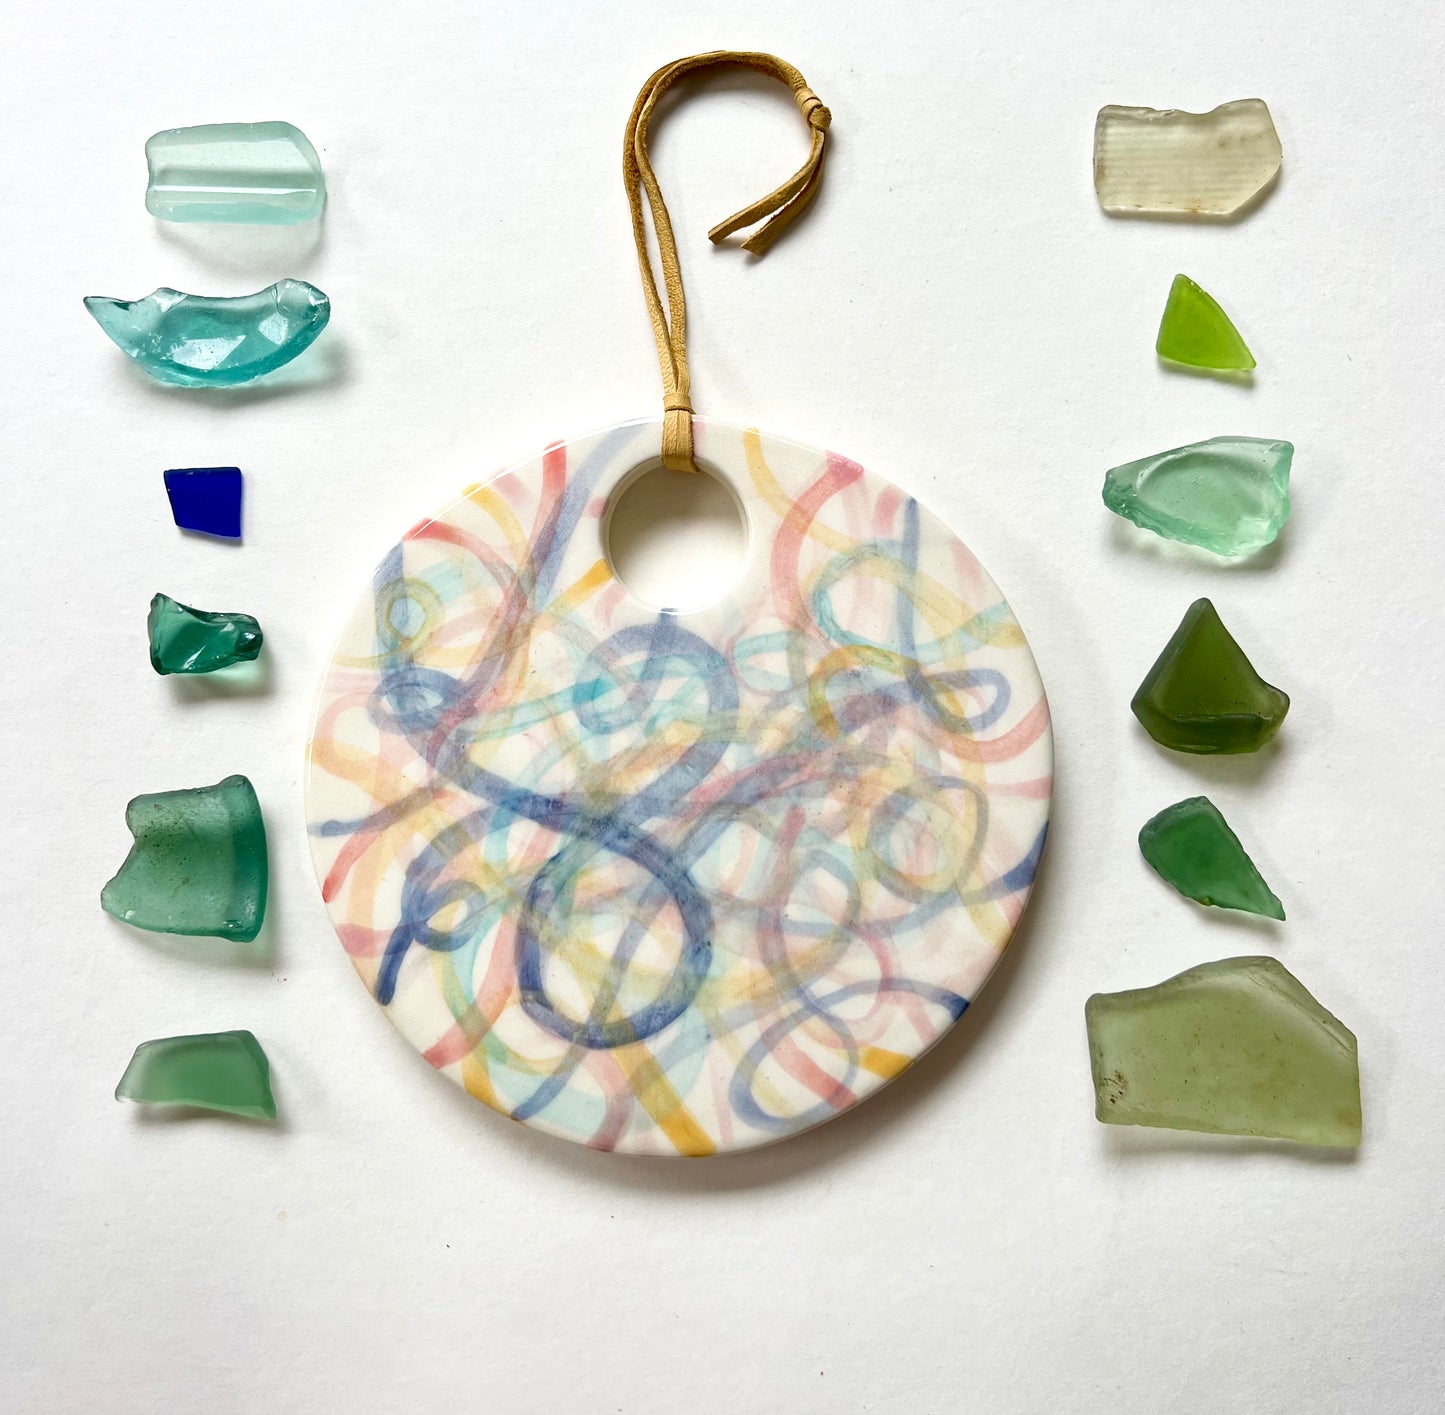 ‘apron strings’ knot painting - one of a kind ceramic wall hanging plaque